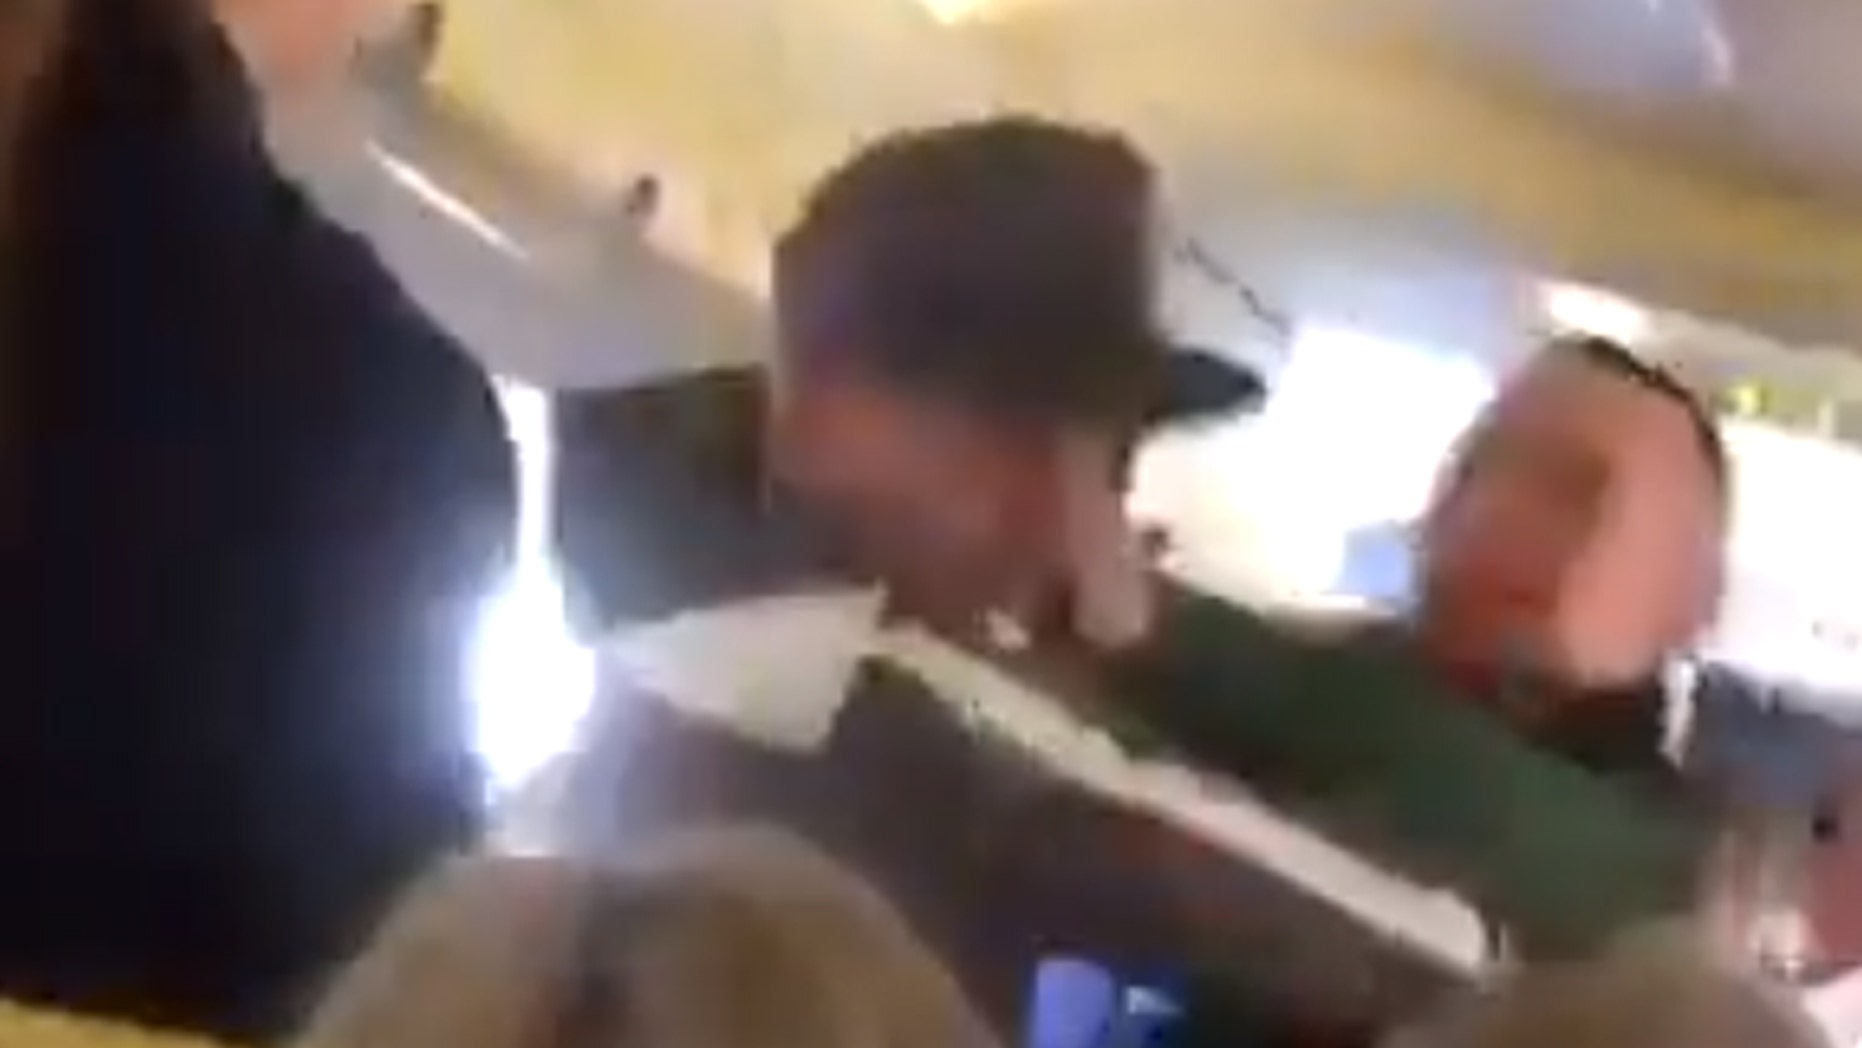 We saw two Ryanair passengers fighting in a shocking video before one of them was escorted with a bloody face.